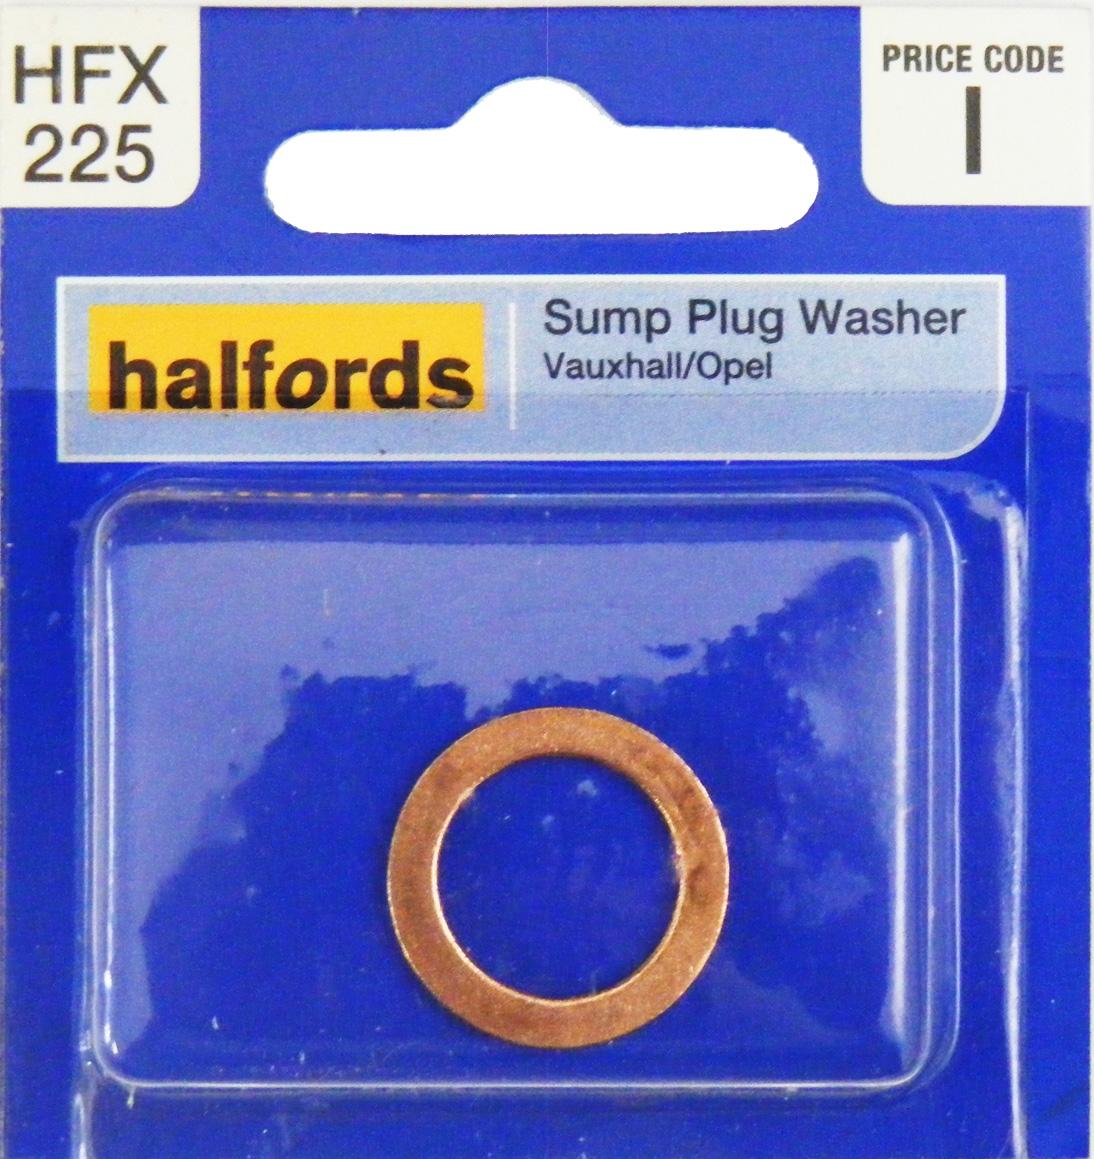 Halfords (Hfx225) Sump Washer For Vauxhall/Opel